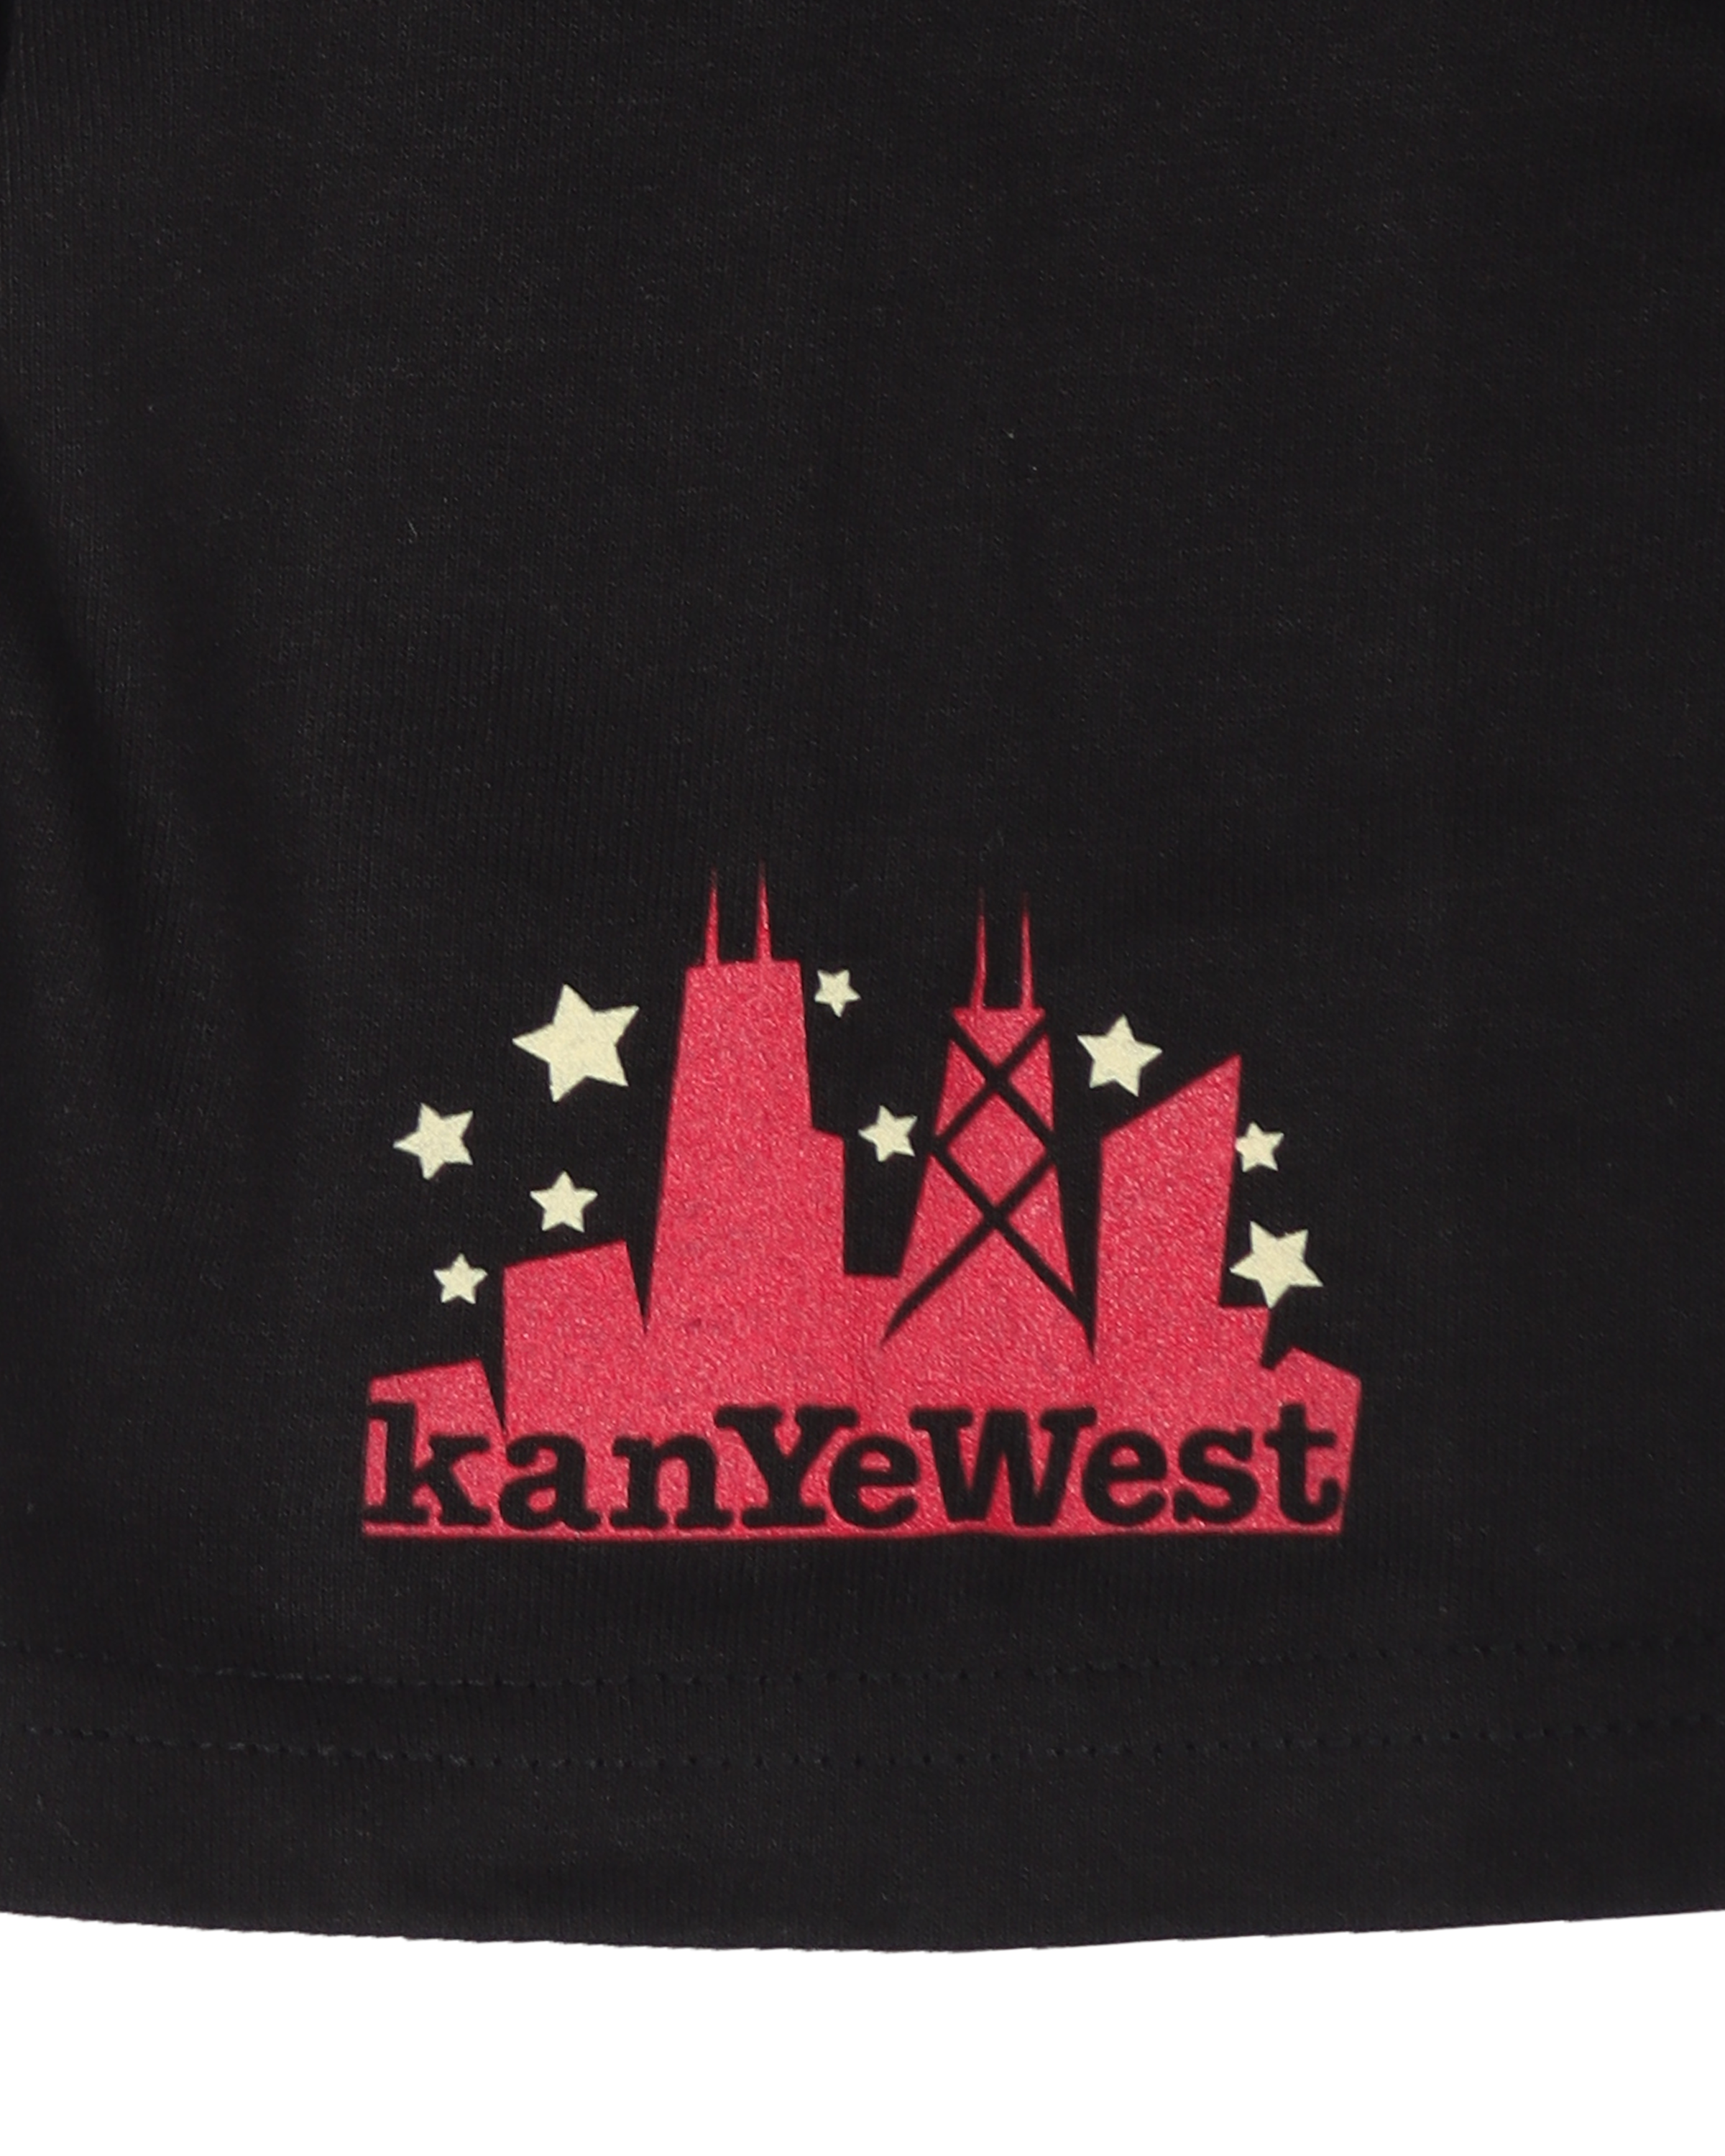 Kanye West 2004 "Miracle Whip" Benz T-Shirt